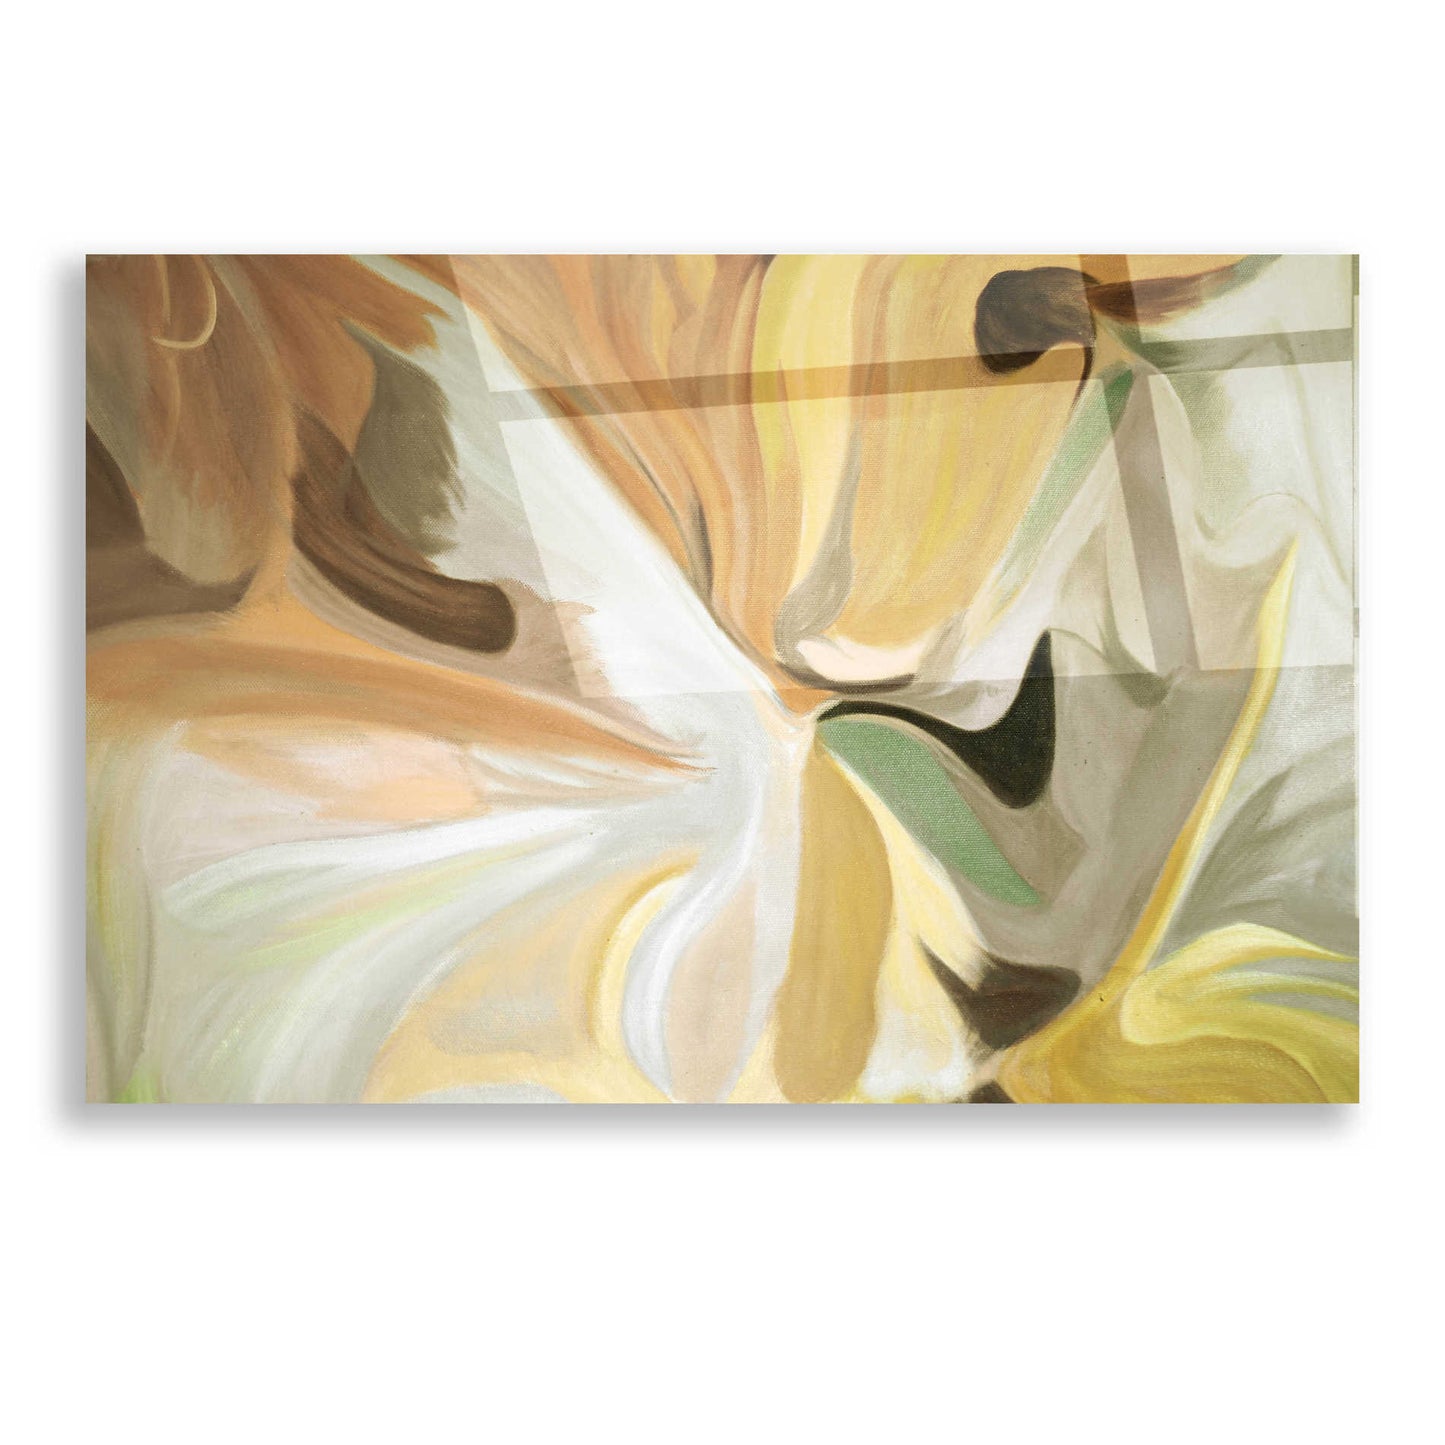 Epic Art 'Notes of Elegance 7' by Irena Orlov, Acrylic Glass Wall Art,16x12